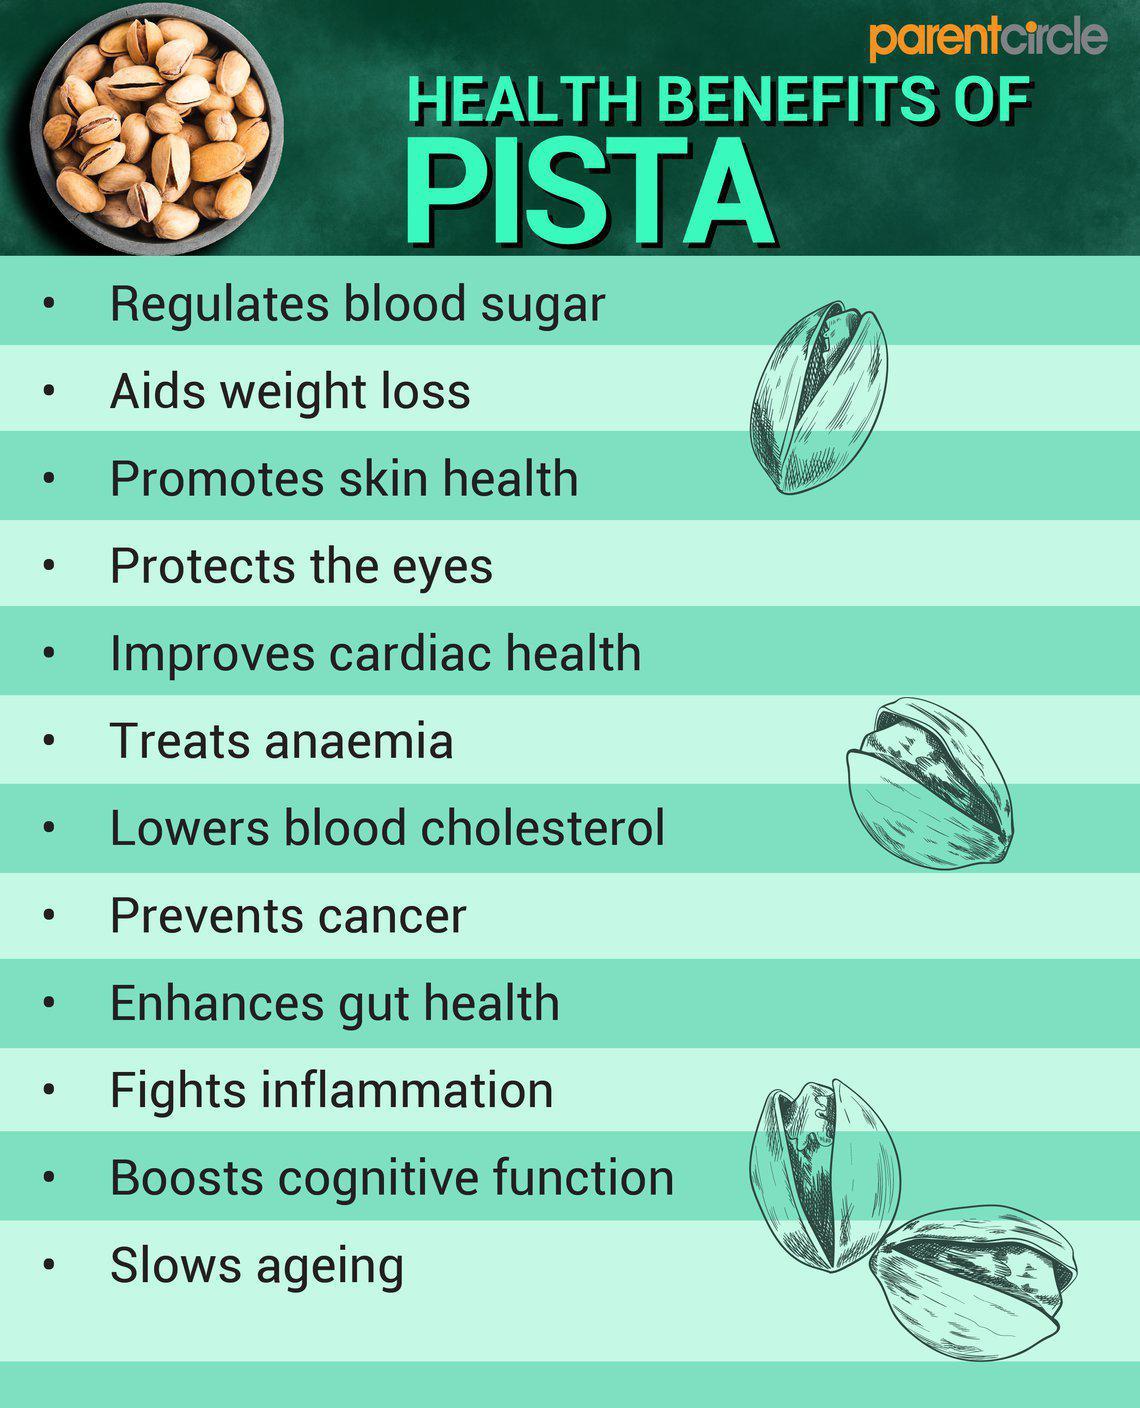 Pista Health Benefits and Calories, Pistachio Nuts Nutritional Facts and  Value Per 100g, Pista Side Effects | ParentCircle